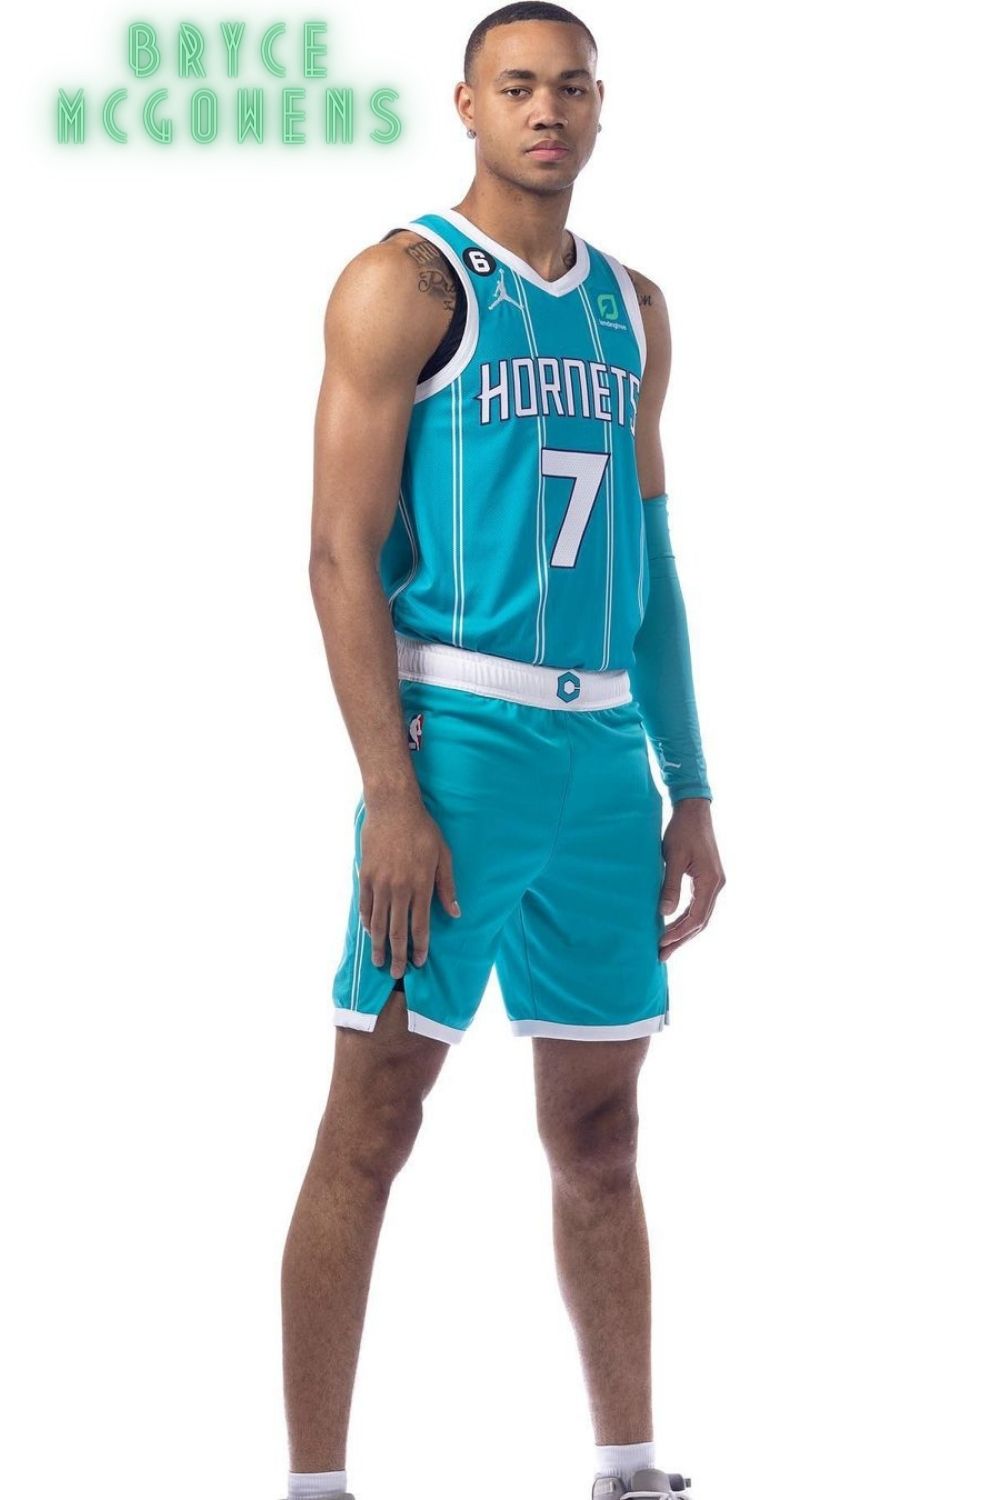 McGowens For Hornets 